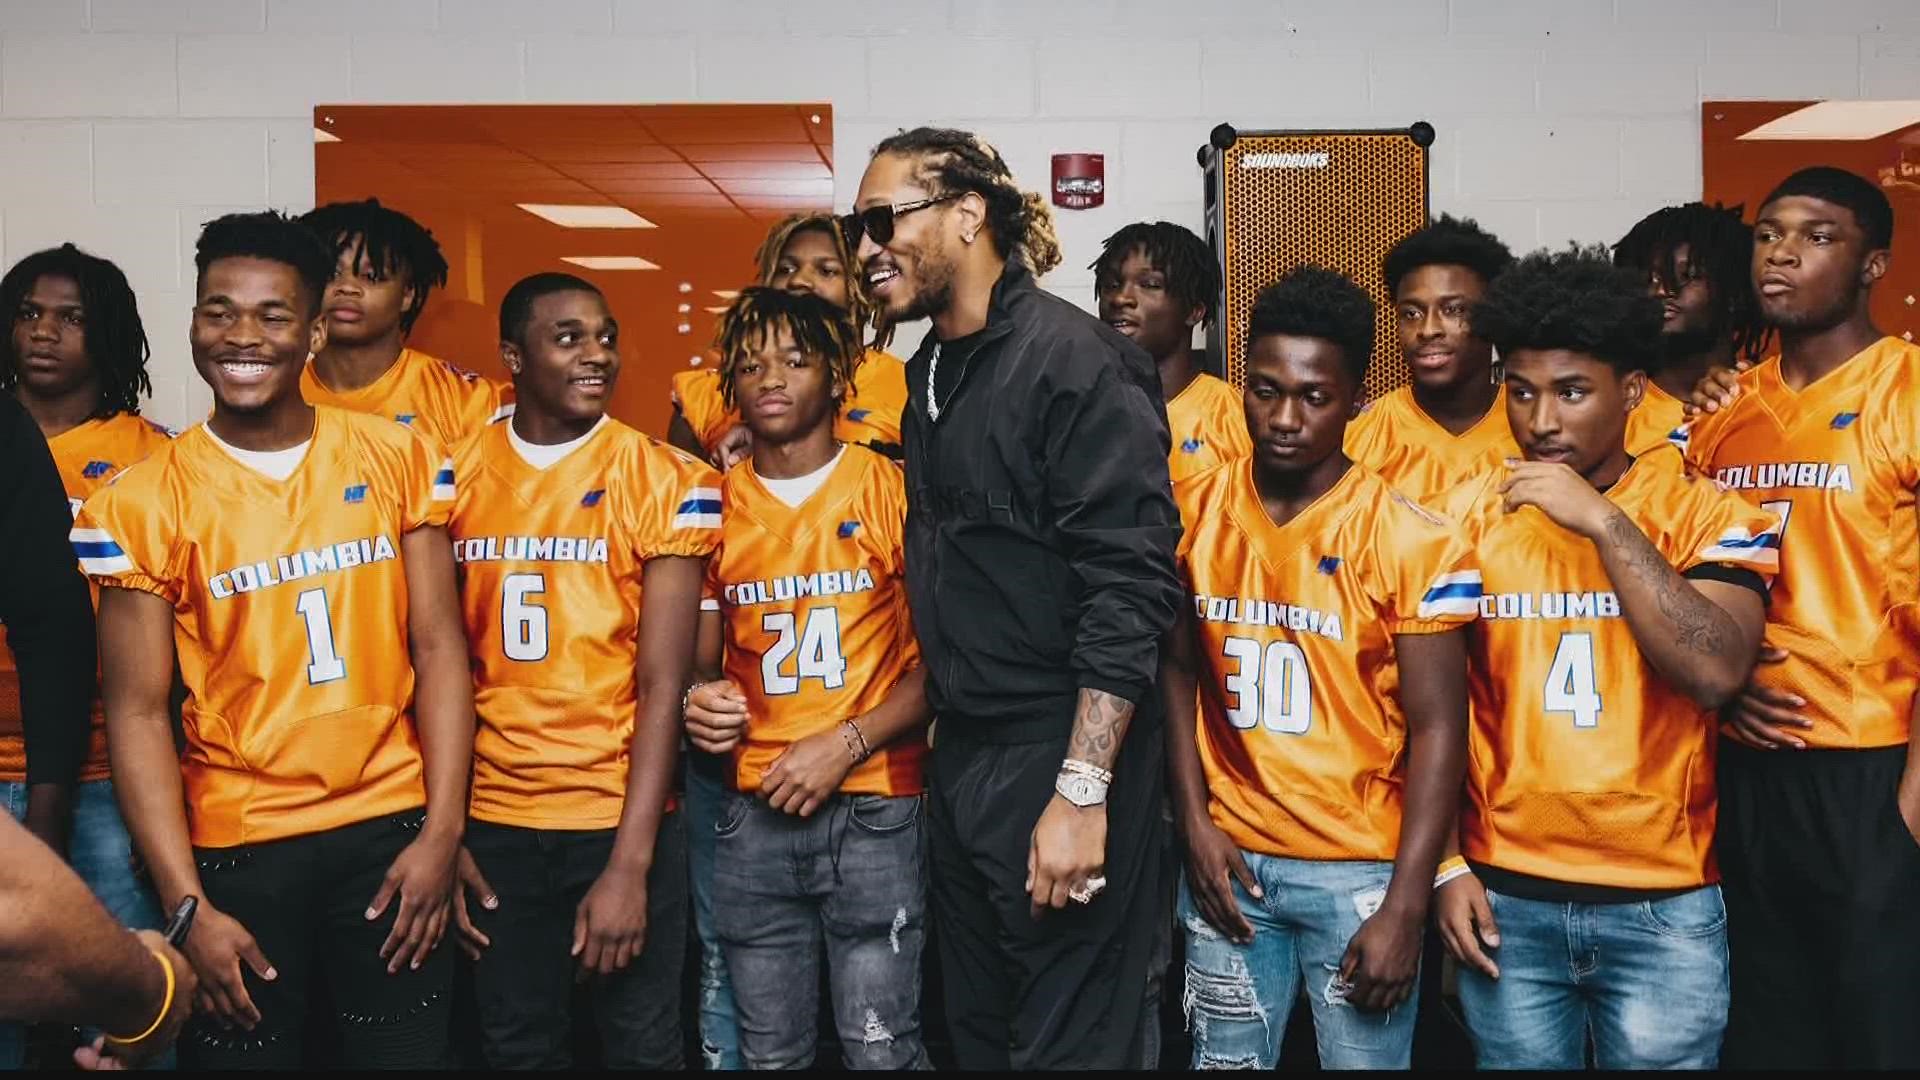 The hip-hop artist wanted to give back to his alma mater.